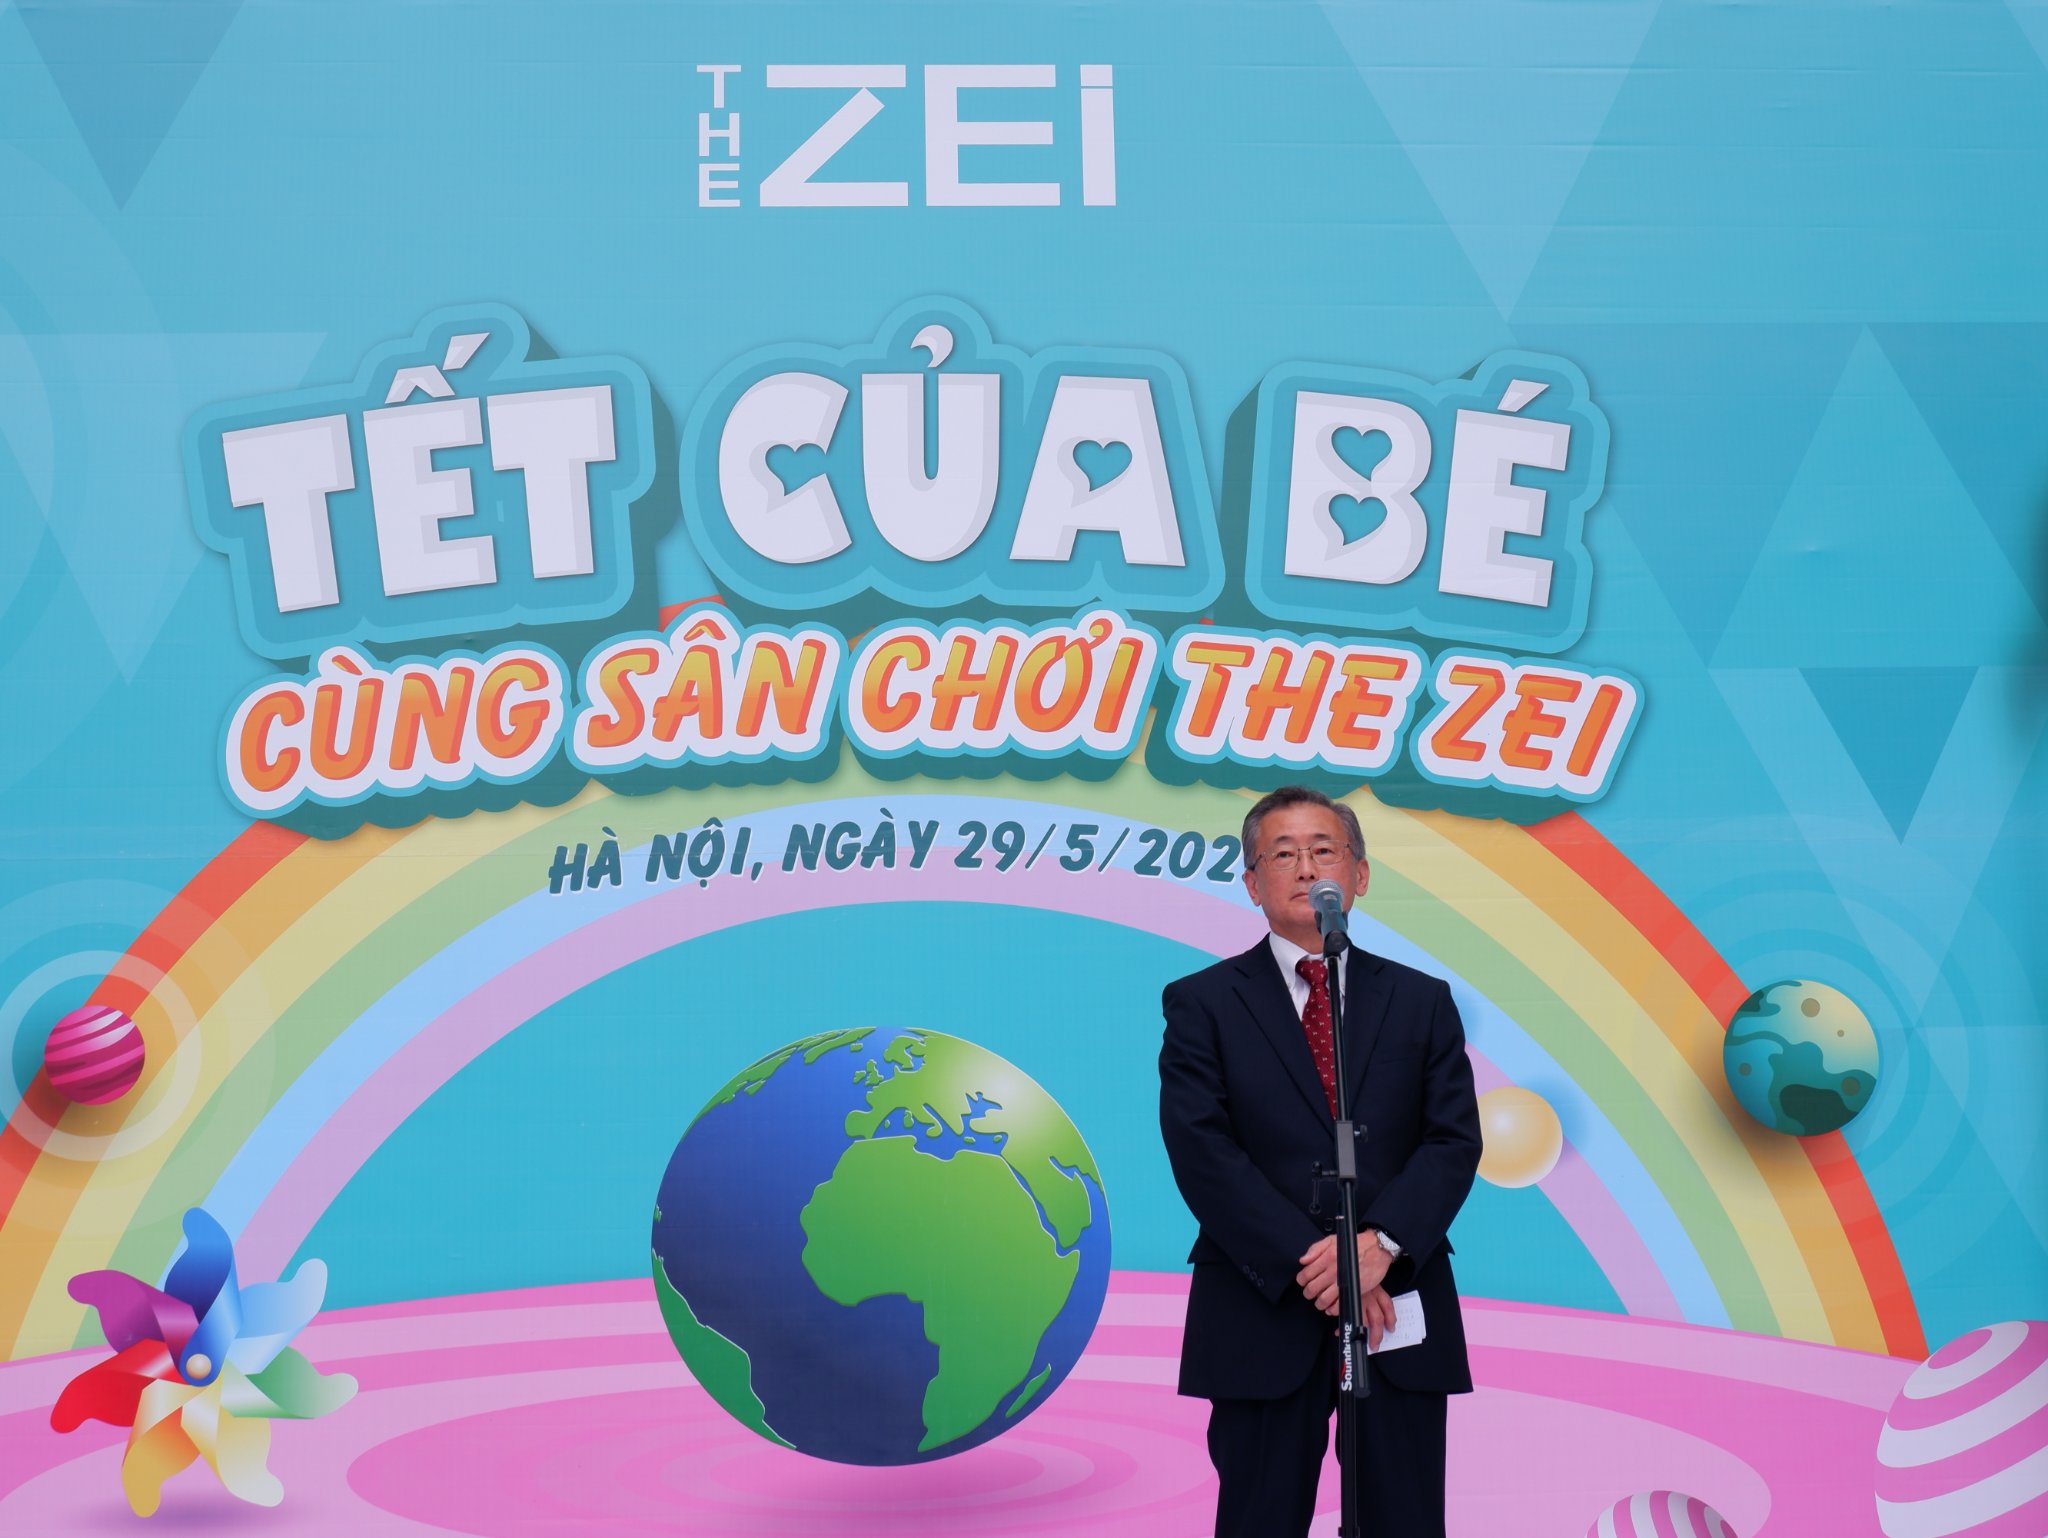 June 1 event opening ceremony at The ZEI